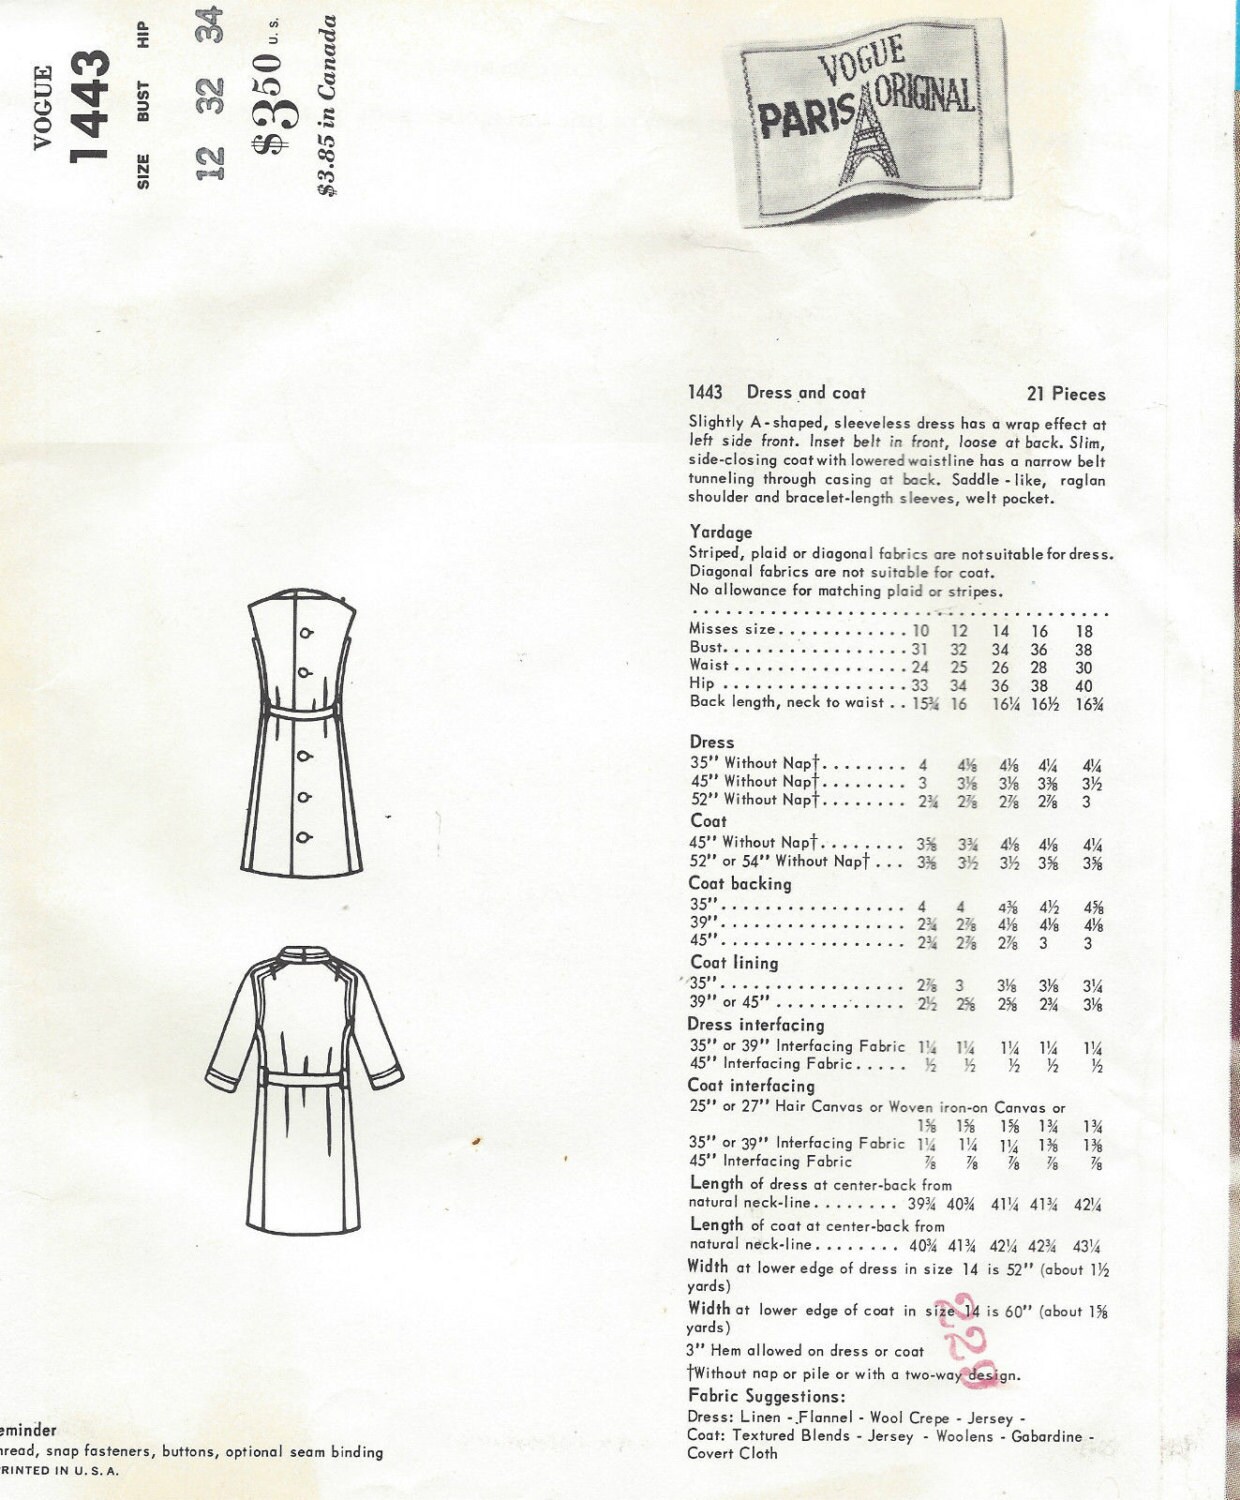 1965 Vintage VOGUE Sewing Pattern Dress & Coat B32 1422 by - Etsy